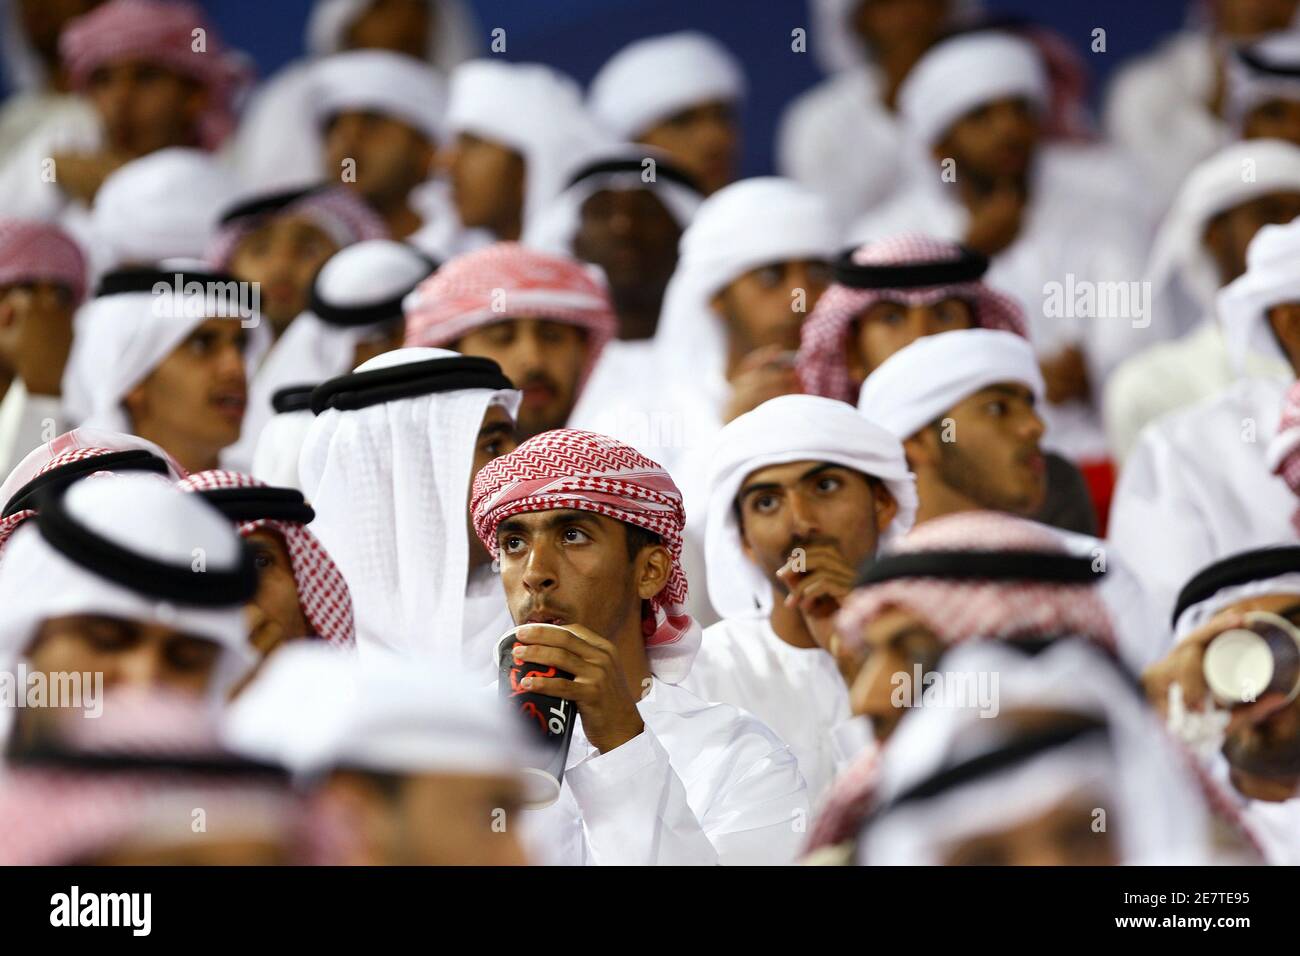 Fans sit in the stands during the FIFA Club World Cup soccer match between TP Mazembe and Pohang Steelers at Mohammad Bin Zayed stadium in Abu Dhabi December 11, 2009. REUTERS/Fahad Shadeed (UNITED ARAB EMIRATES SPORT SOCCER) Stock Photo